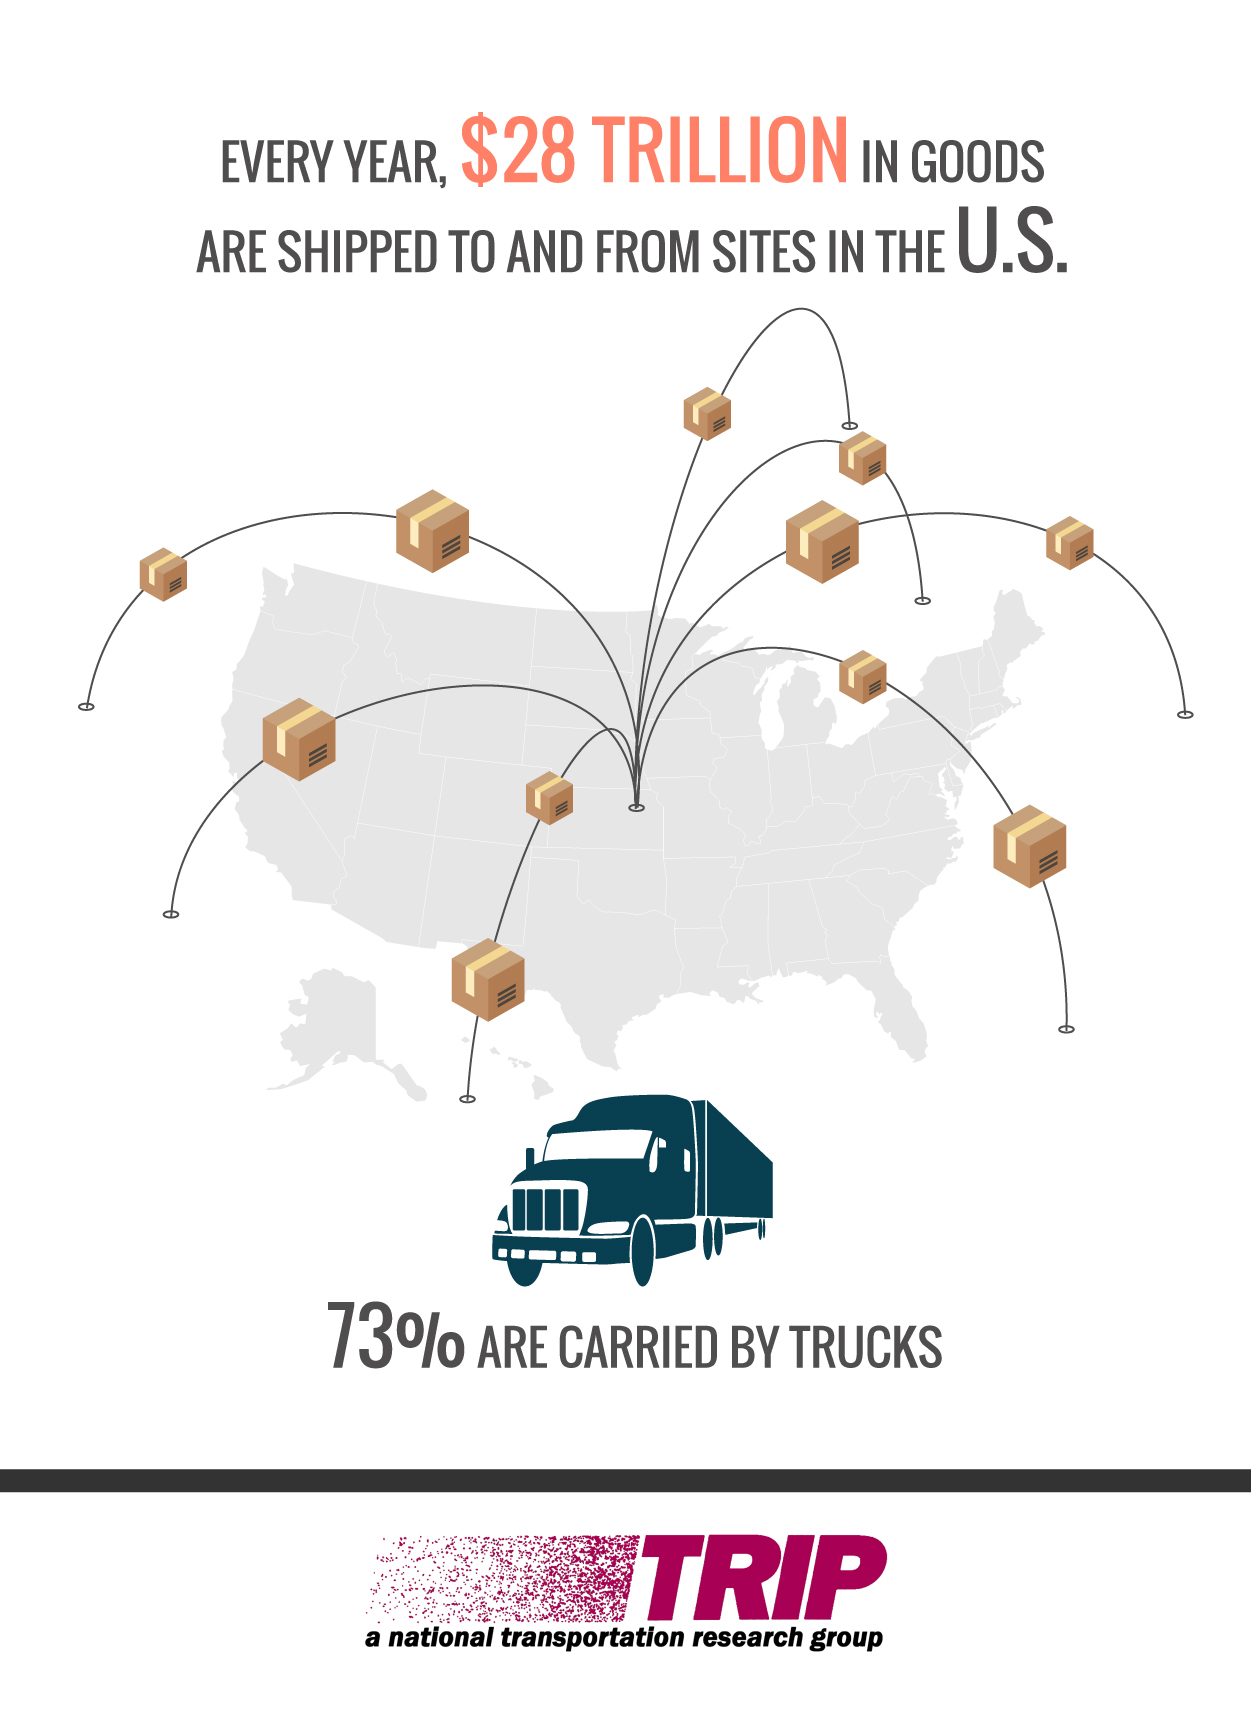 Goods Shipped in the U.S. Infographic